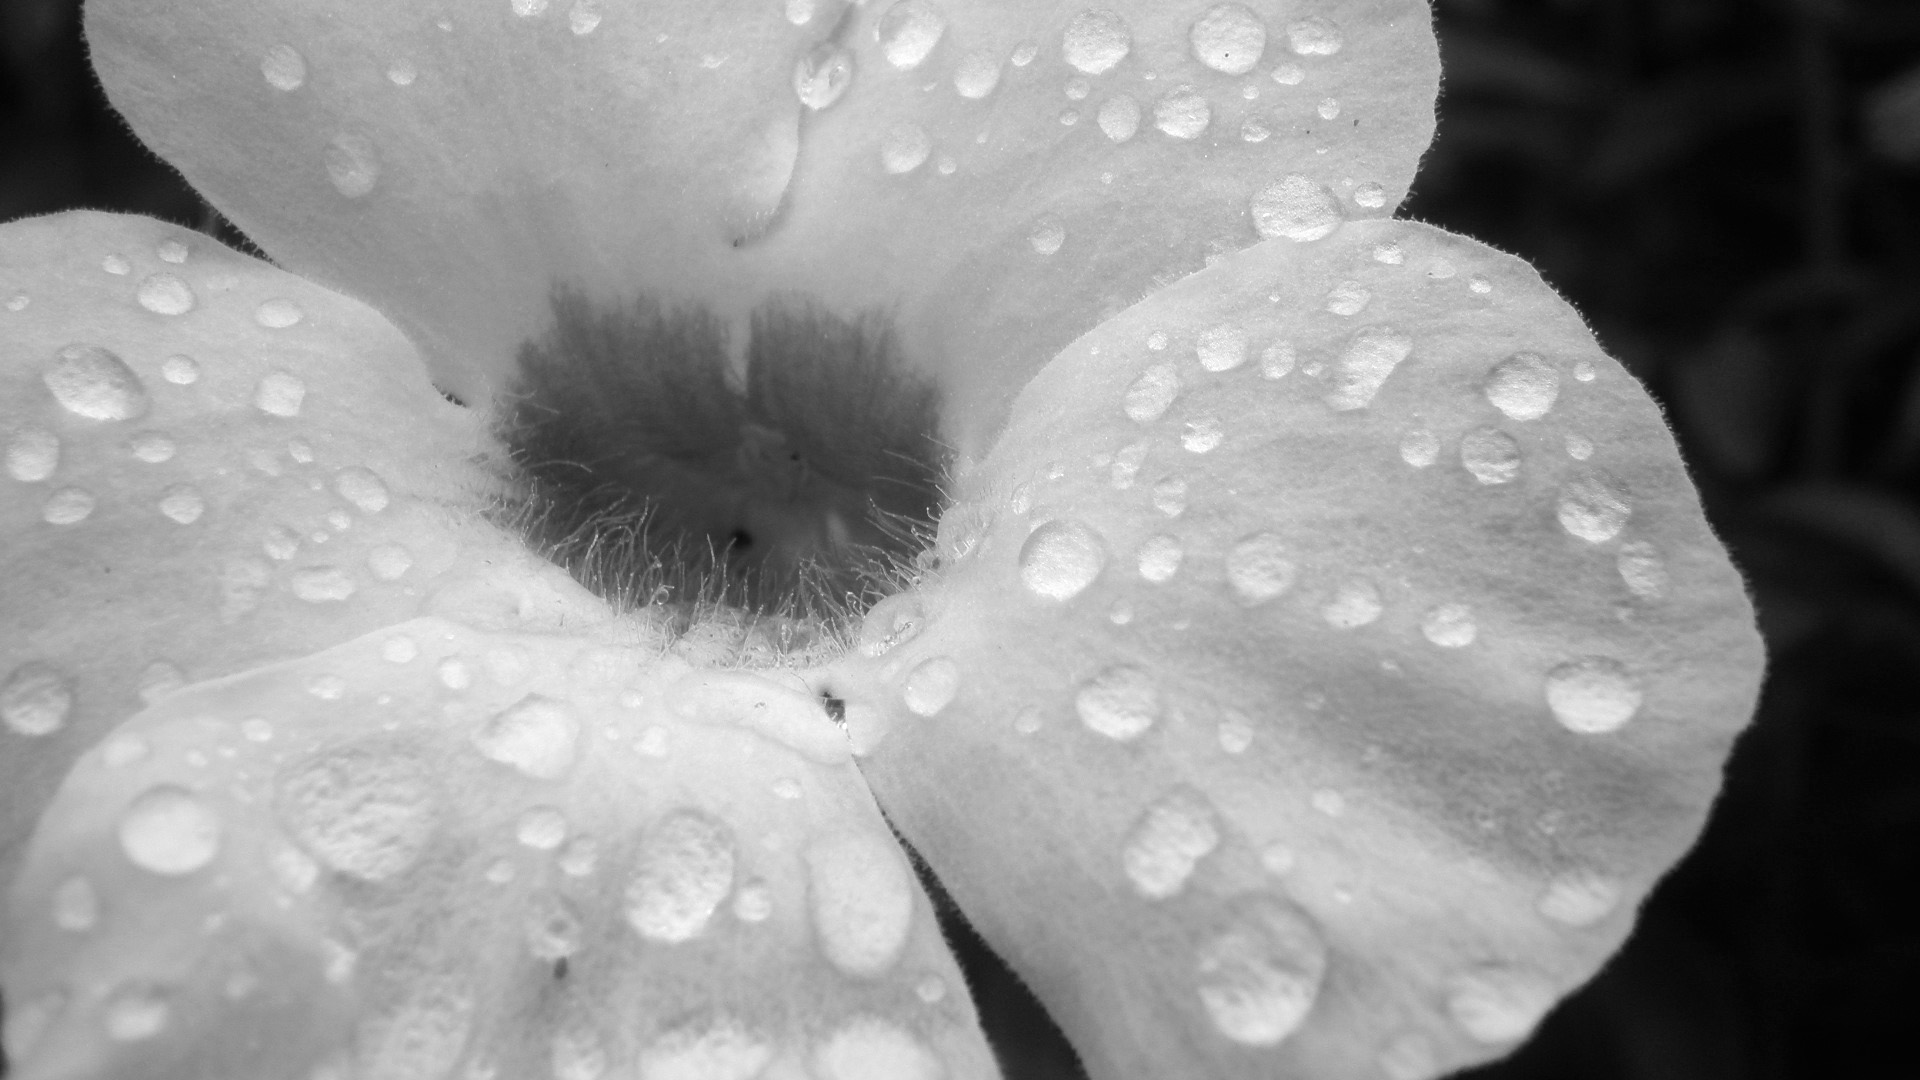 Flower Wallpaper Hd Black and White Widescreen Download for